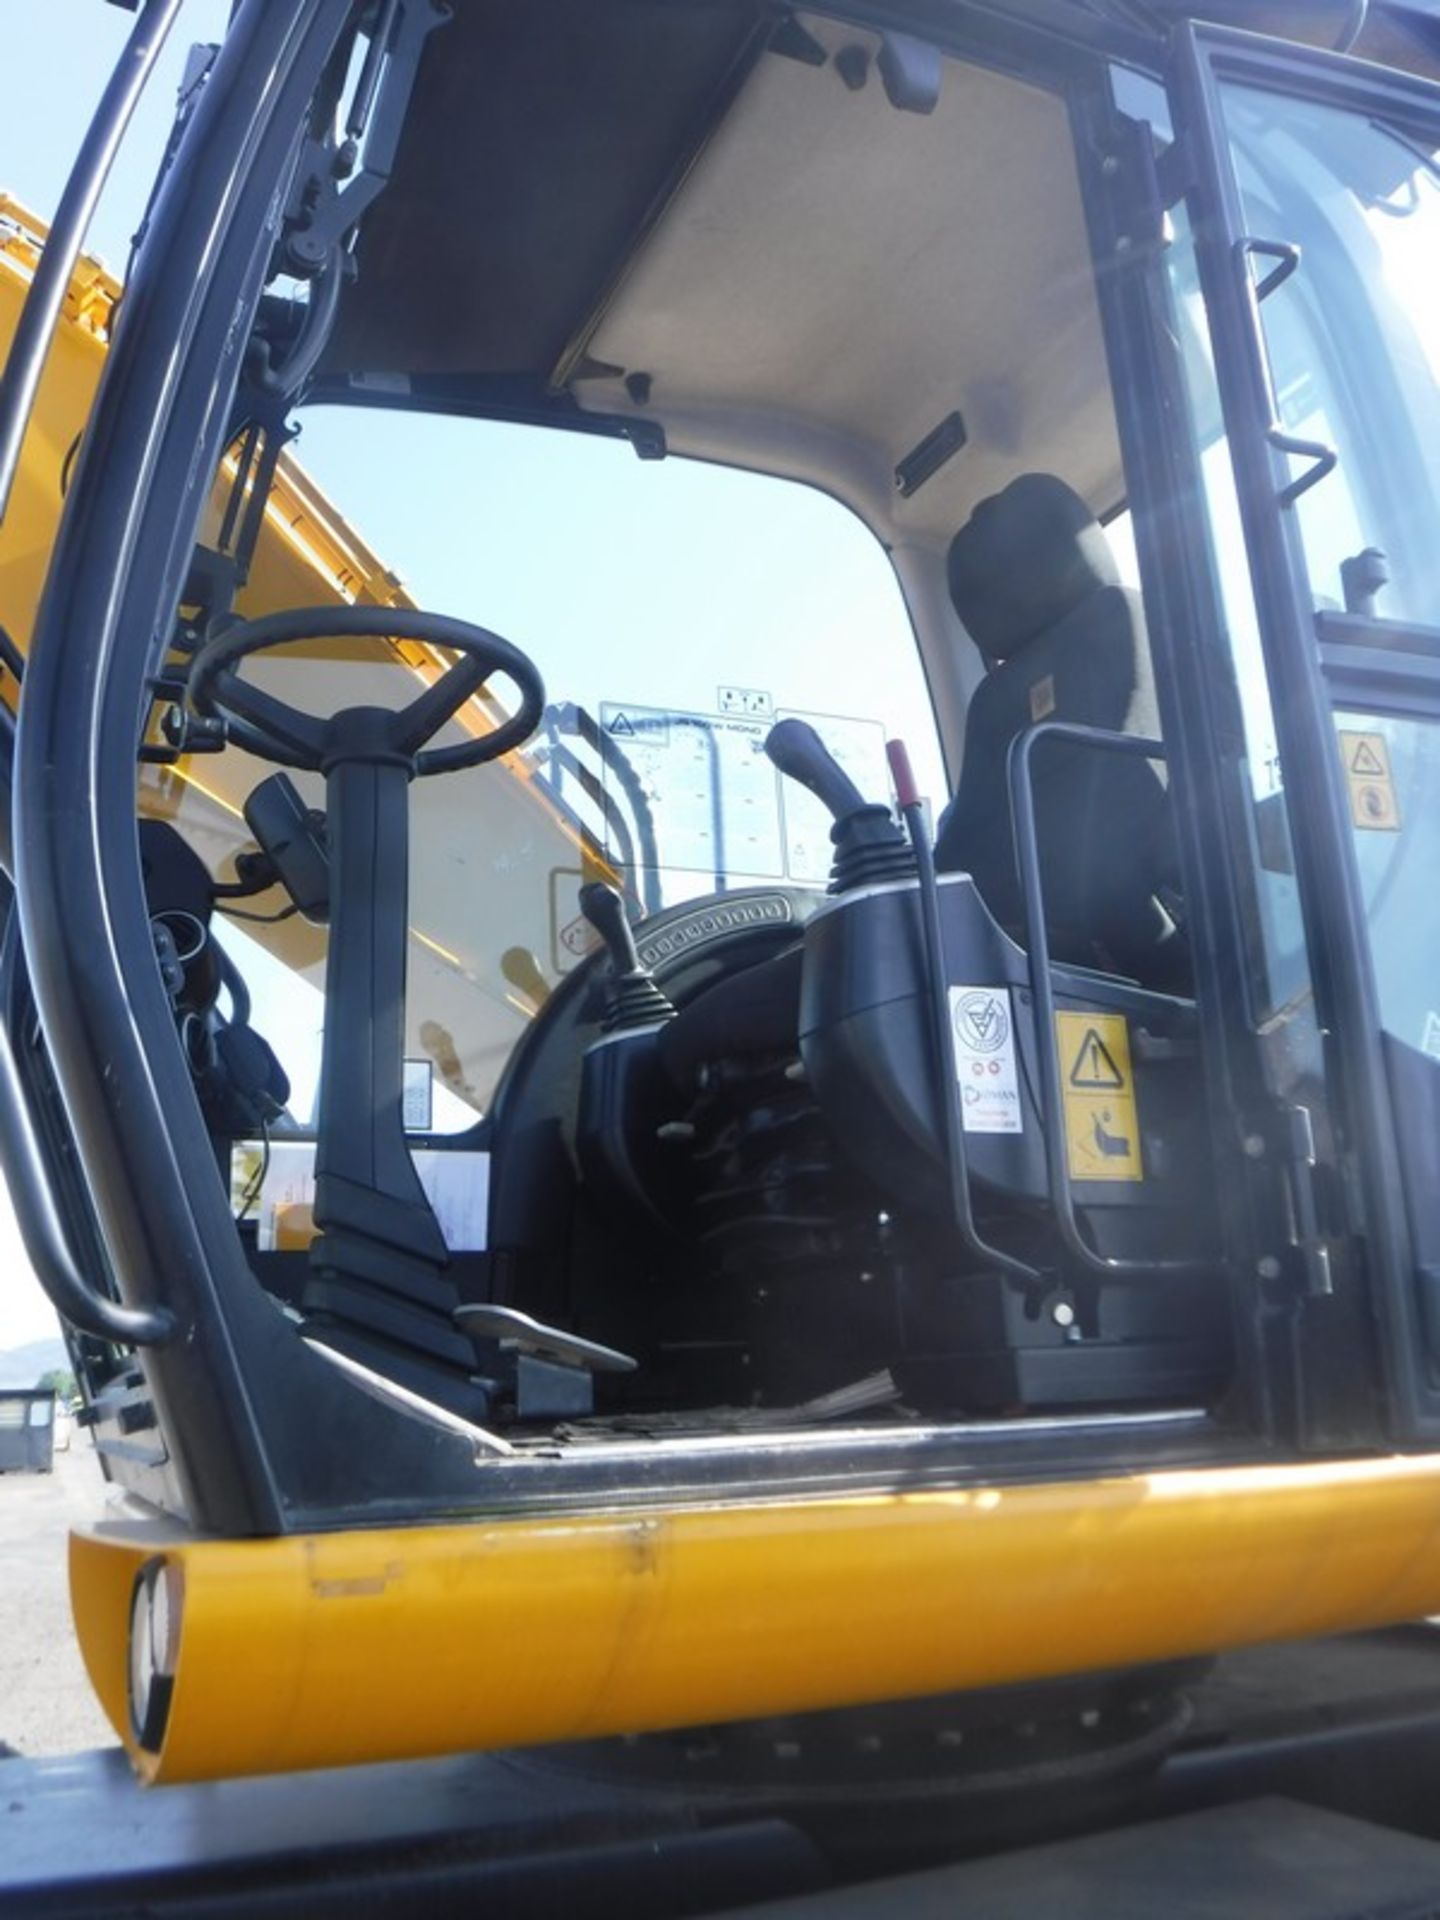 2014 JCB 160W, reg - SF14GSY, s/n DH02299074, 4608hrs (not verified) - Image 9 of 25